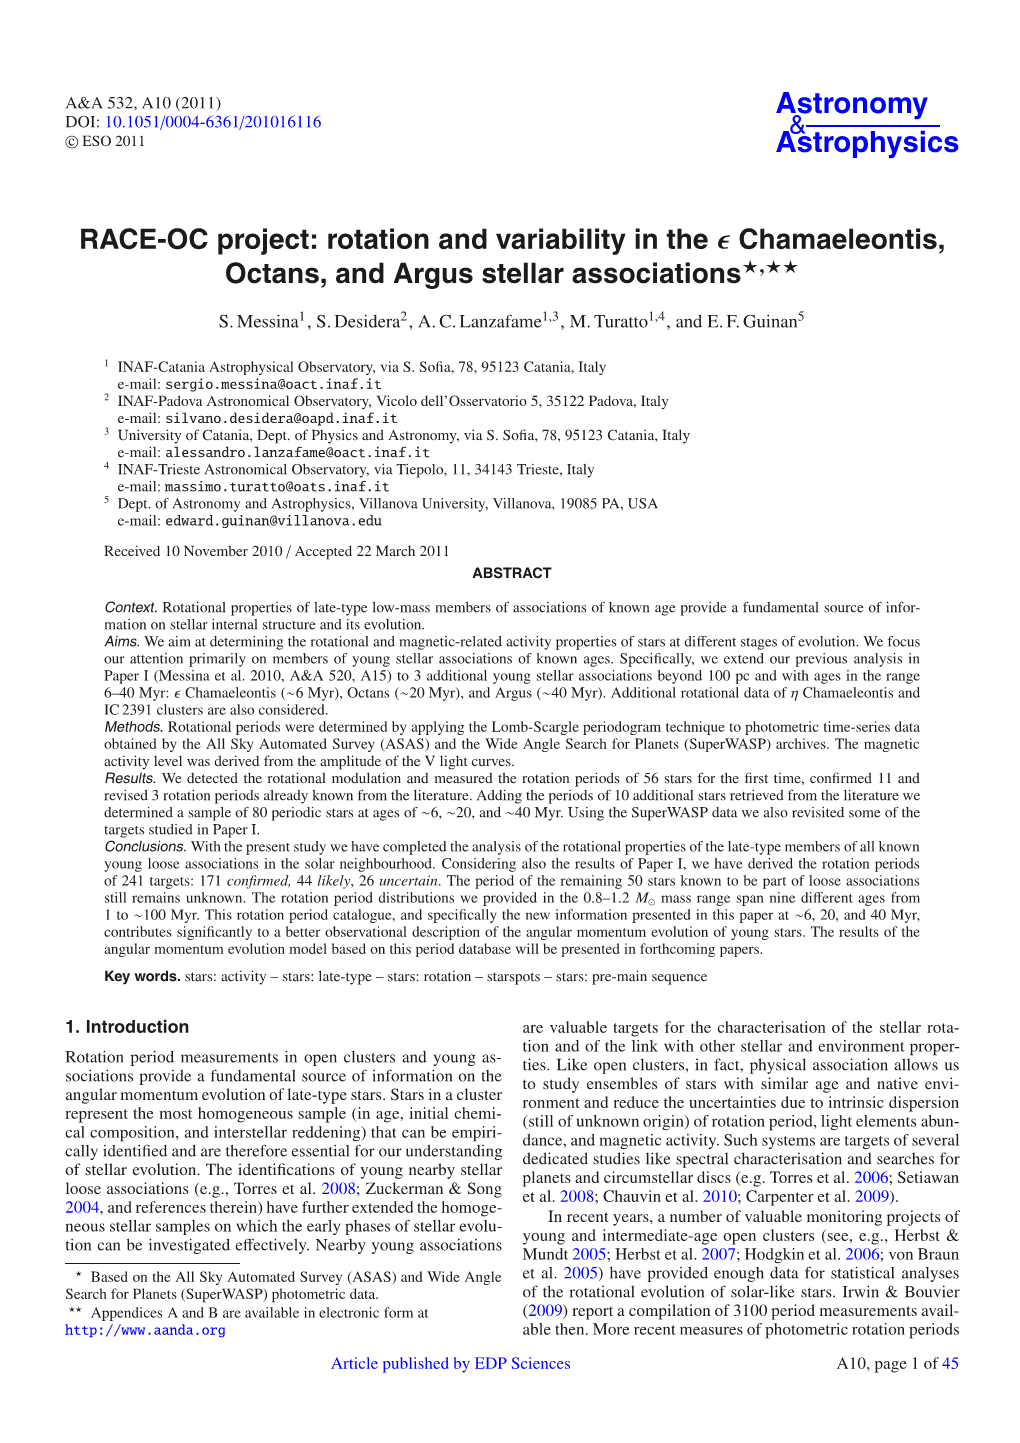 Rotation and Variability in the Ε Chamaeleontis, Octans, and Argus